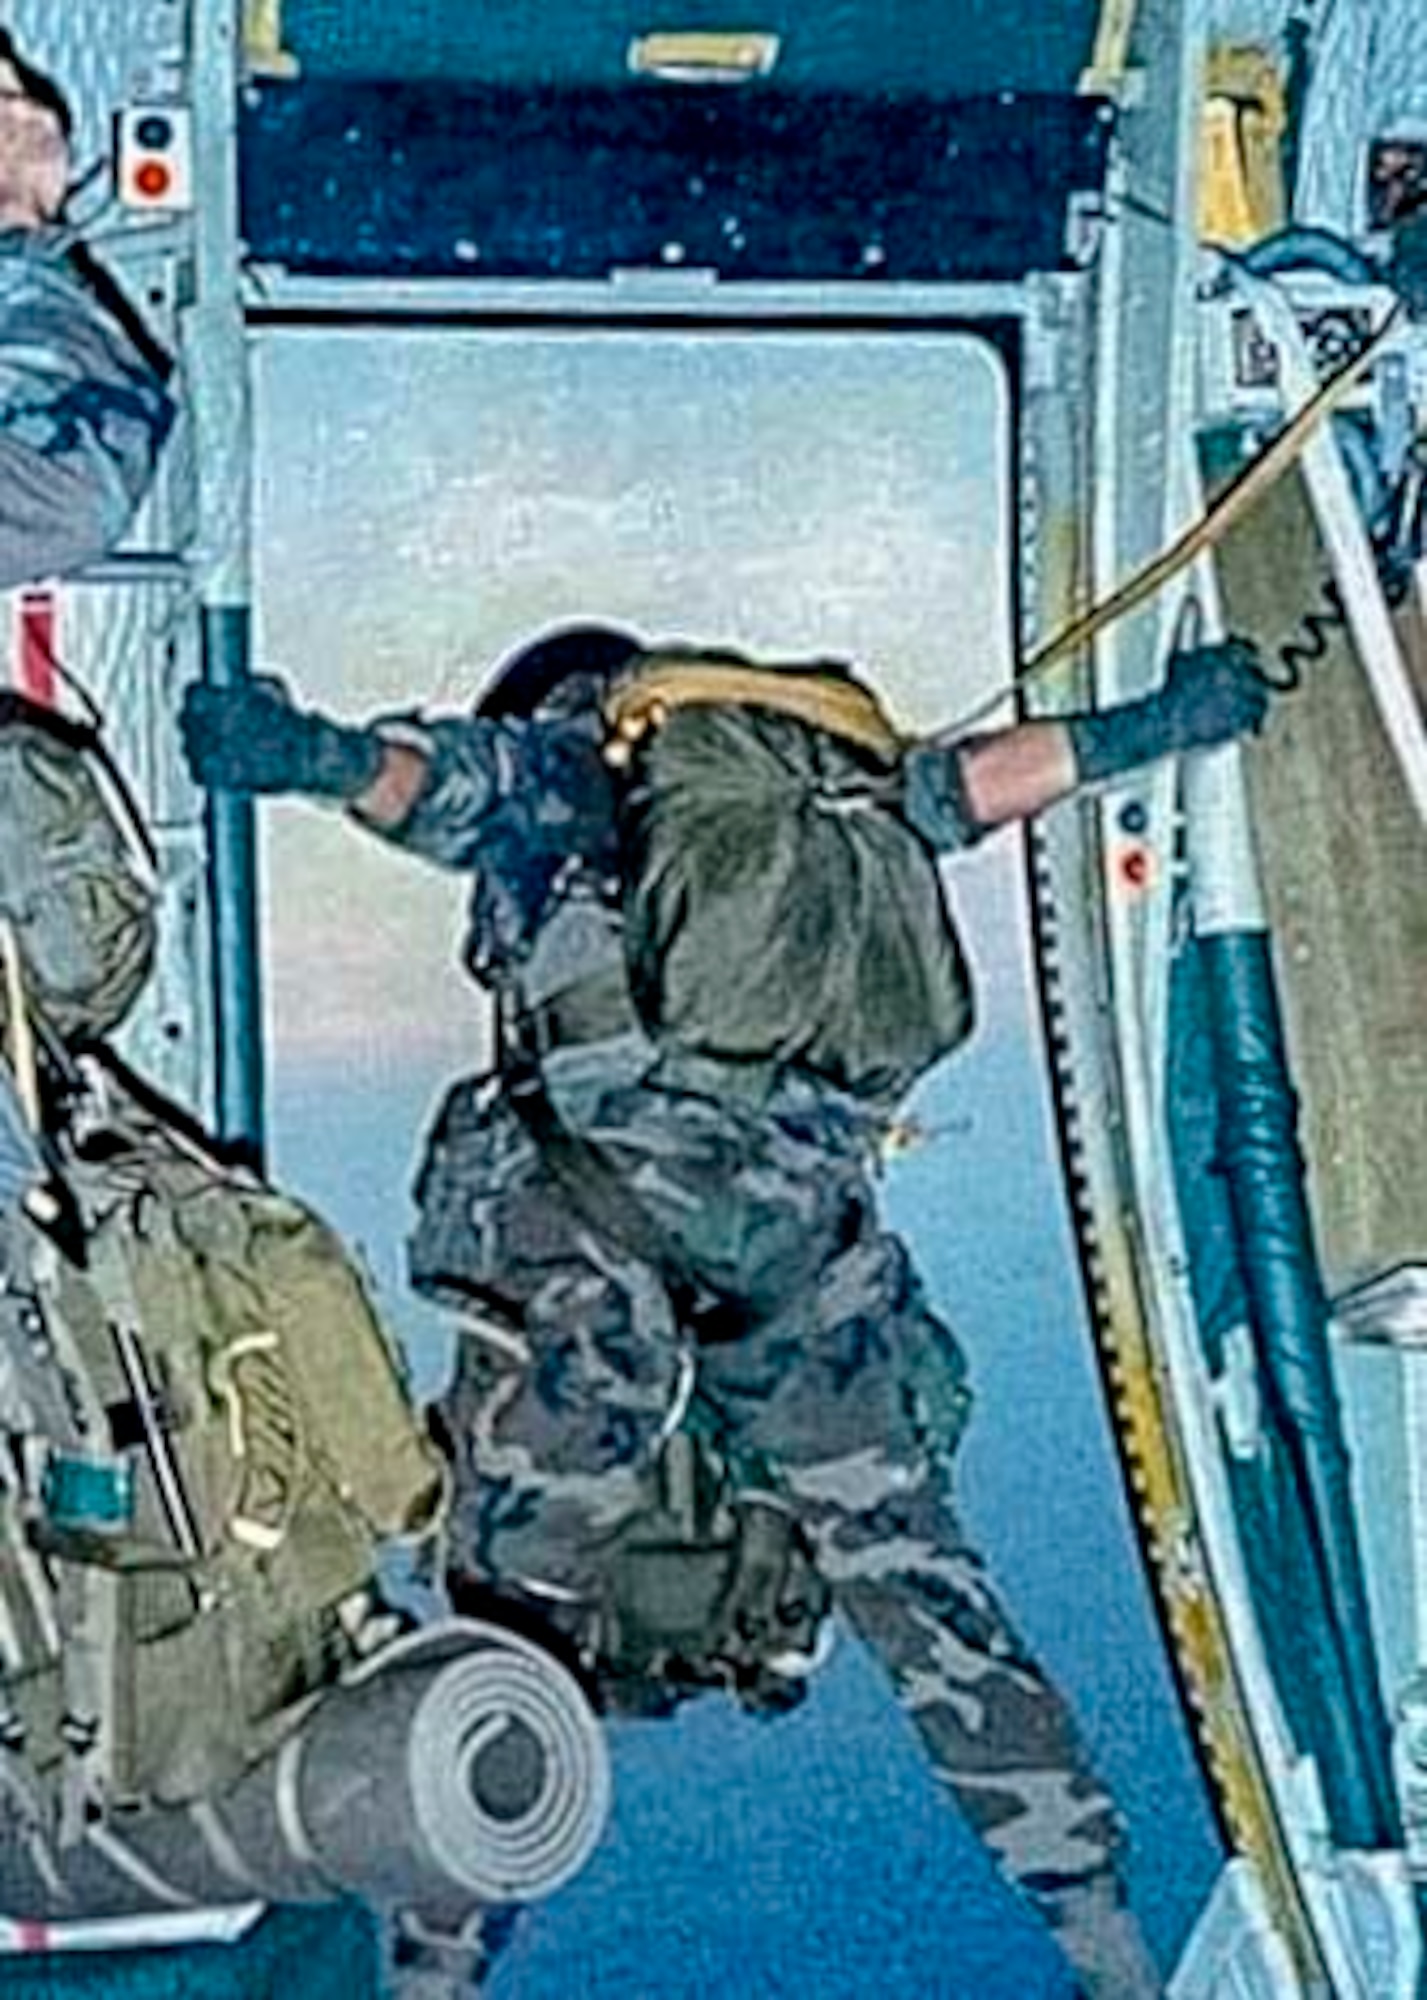 U.S. Army National Guard Jumpmaster Donald Tarrance stands in the door of an aircraft preparing to jump as part of training with the 20th Special Forces Group over Alabama, 1992. The, now, Air Force Reserve Chief Master Sgt. Donald Tarrance has served for over 40 years in a variety of positions and statuses. (Courtesy photo)